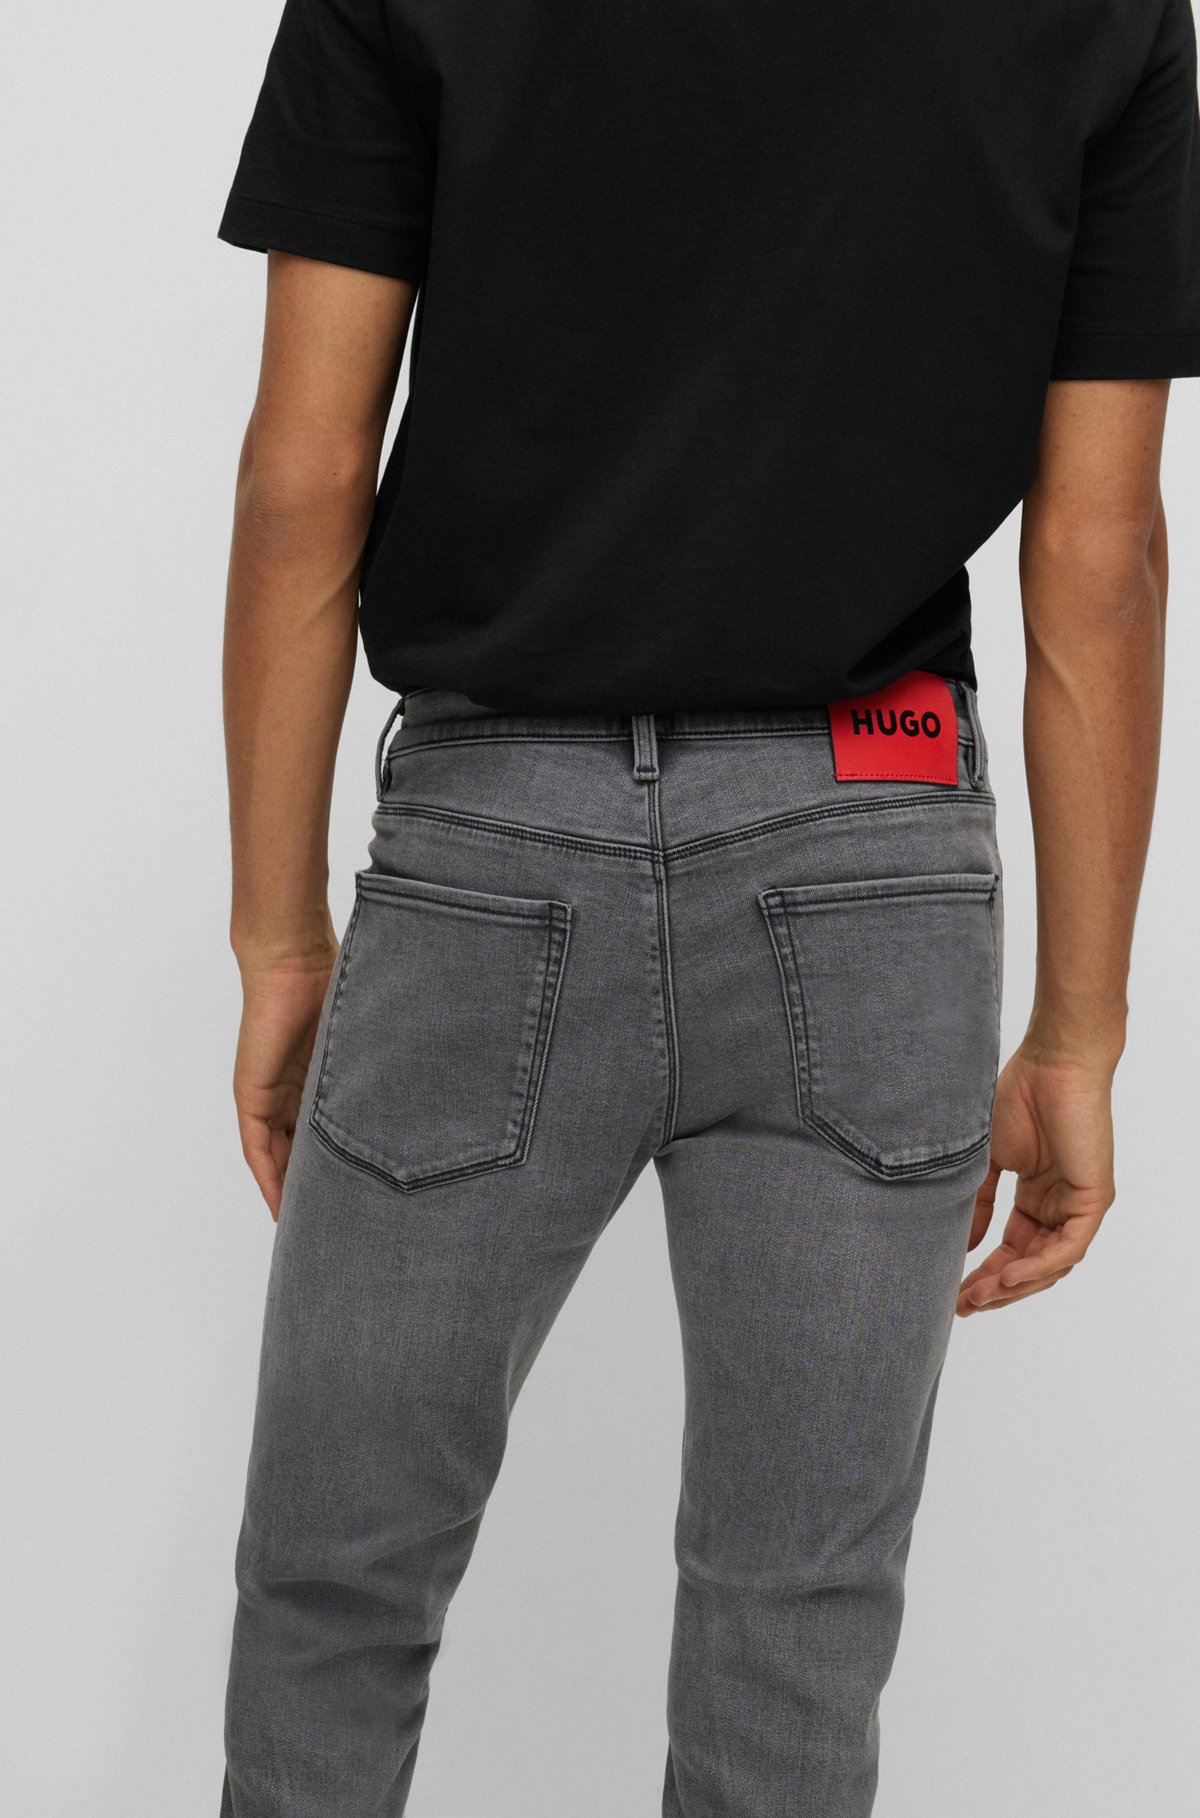 HUGO - Extra-slim-fit jeans in mid-gray